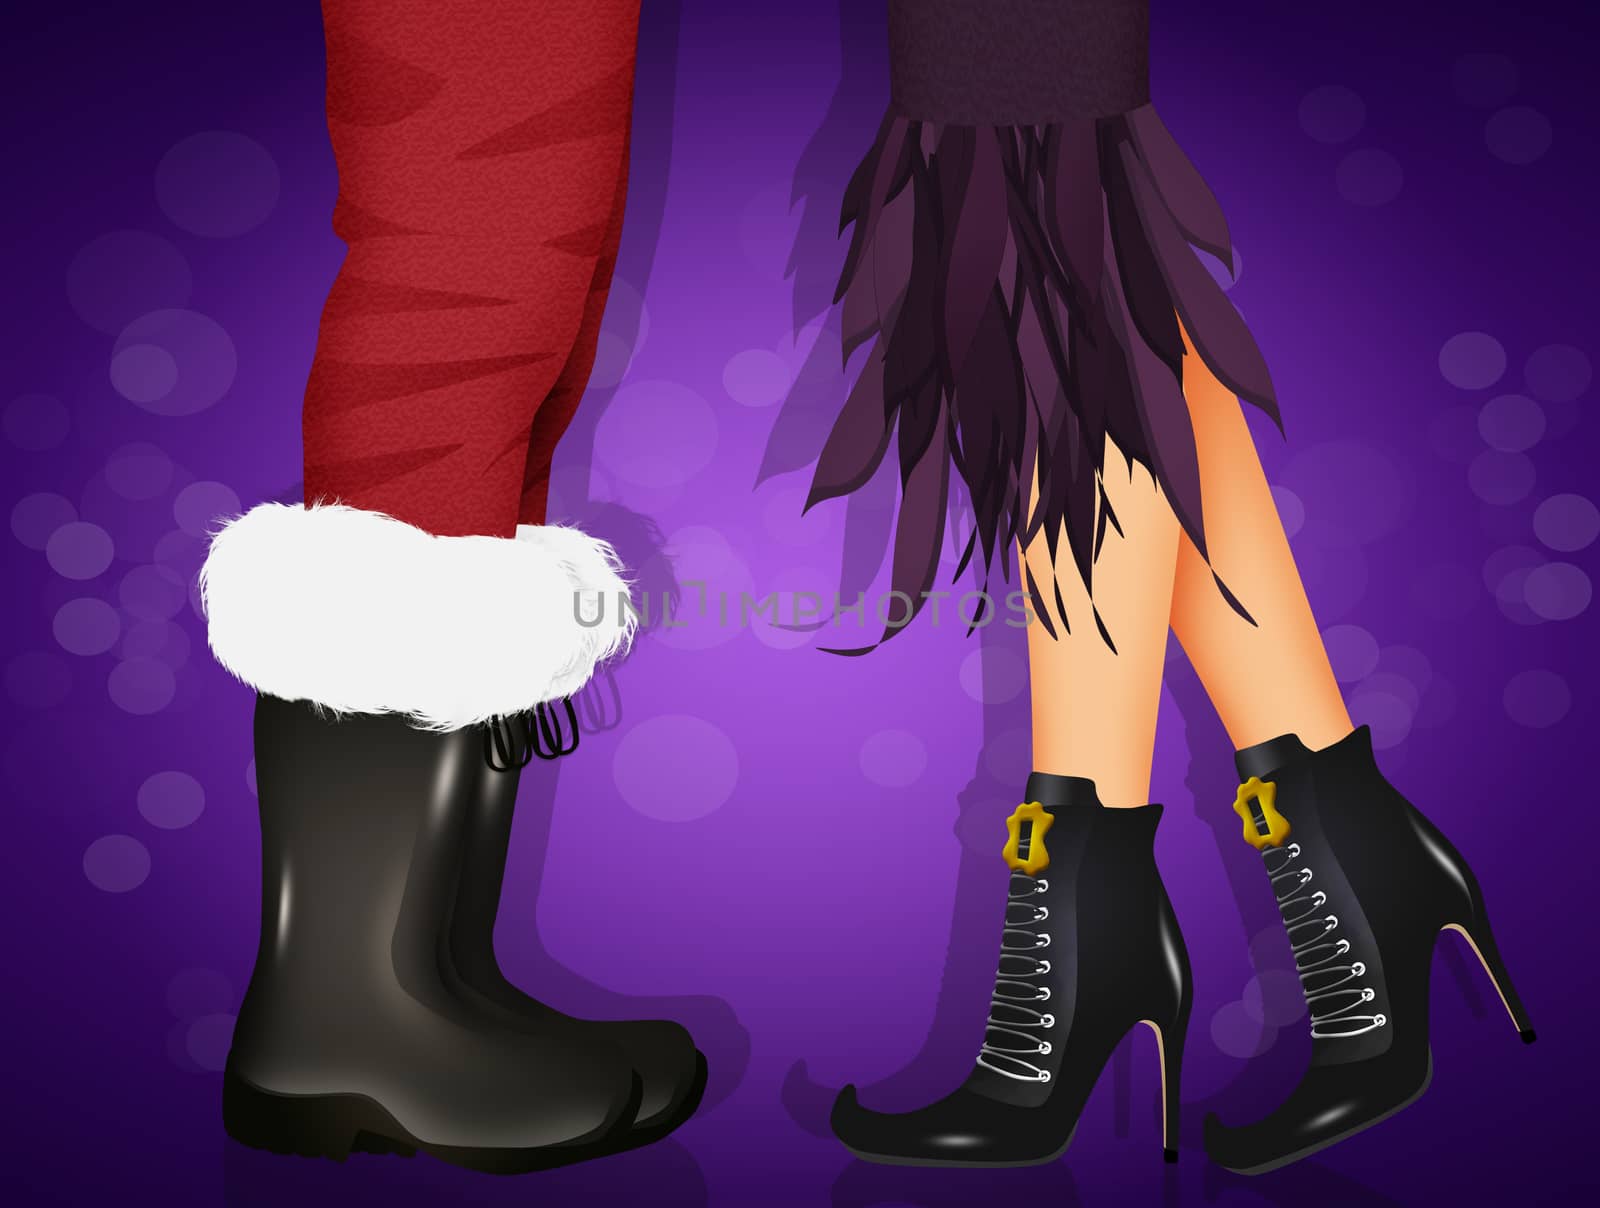 witch's and Santa's legs by adrenalina